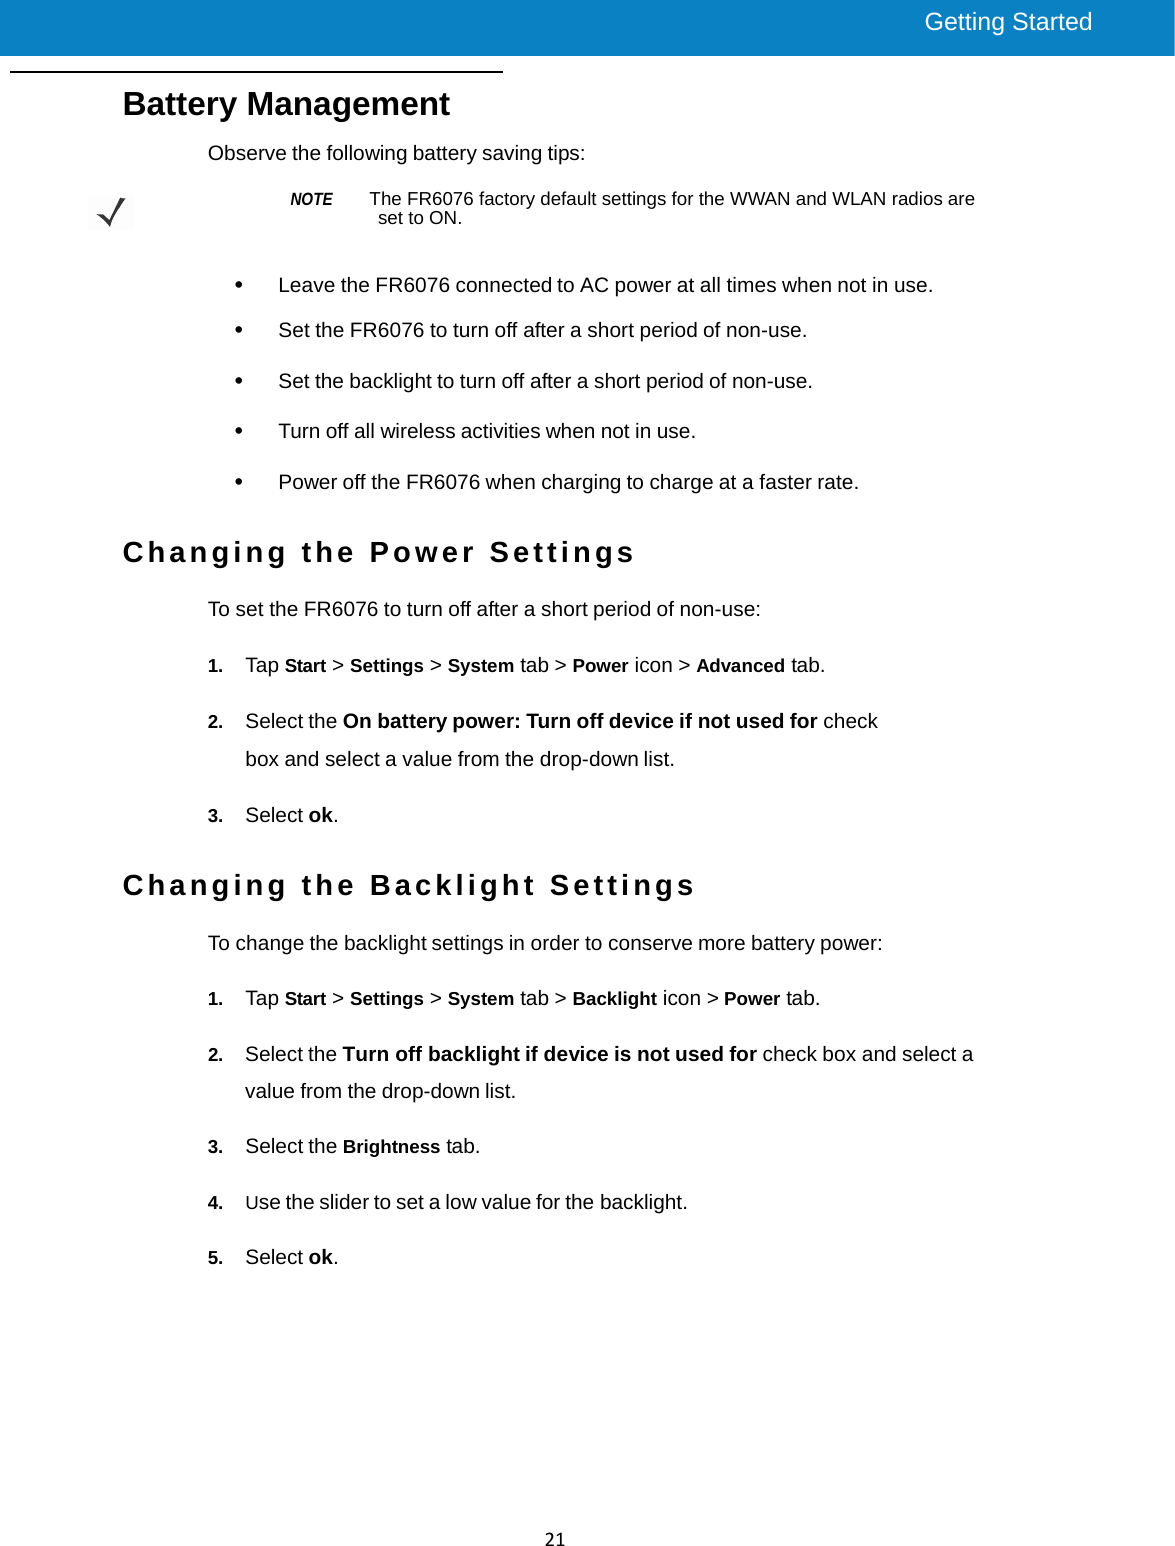 Getting Started     FR6800 UserGuide 21 Battery Management Observe the following battery saving tips:  NOTE    The FR6076 factory default settings for the WWAN and WLAN radios are set to ON.   •   Leave the FR6076 connected to AC power at all times when not in use.  •   Set the FR6076 to turn off after a short period of non-use.  •   Set the backlight to turn off after a short period of non-use.  •   Turn off all wireless activities when not in use.  •   Power off the FR6076 when charging to charge at a faster rate.   Changing the Power Settings  To set the FR6076 to turn off after a short period of non-use:  1.  Tap Start &gt; Settings &gt; System tab &gt; Power icon &gt; Advanced tab.  2.  Select the On battery power: Turn off device if not used for check box and select a value from the drop-down list.  3.  Select ok.   Changing the Backlight Settings  To change the backlight settings in order to conserve more battery power:    1.  Tap Start &gt; Settings &gt; System tab &gt; Backlight icon &gt; Power tab.  2.  Select the Turn off backlight if device is not used for check box and select a value from the drop-down list.  3.  Select the Brightness tab.  4.  Use the slider to set a low value for the backlight.  5.  Select ok.    